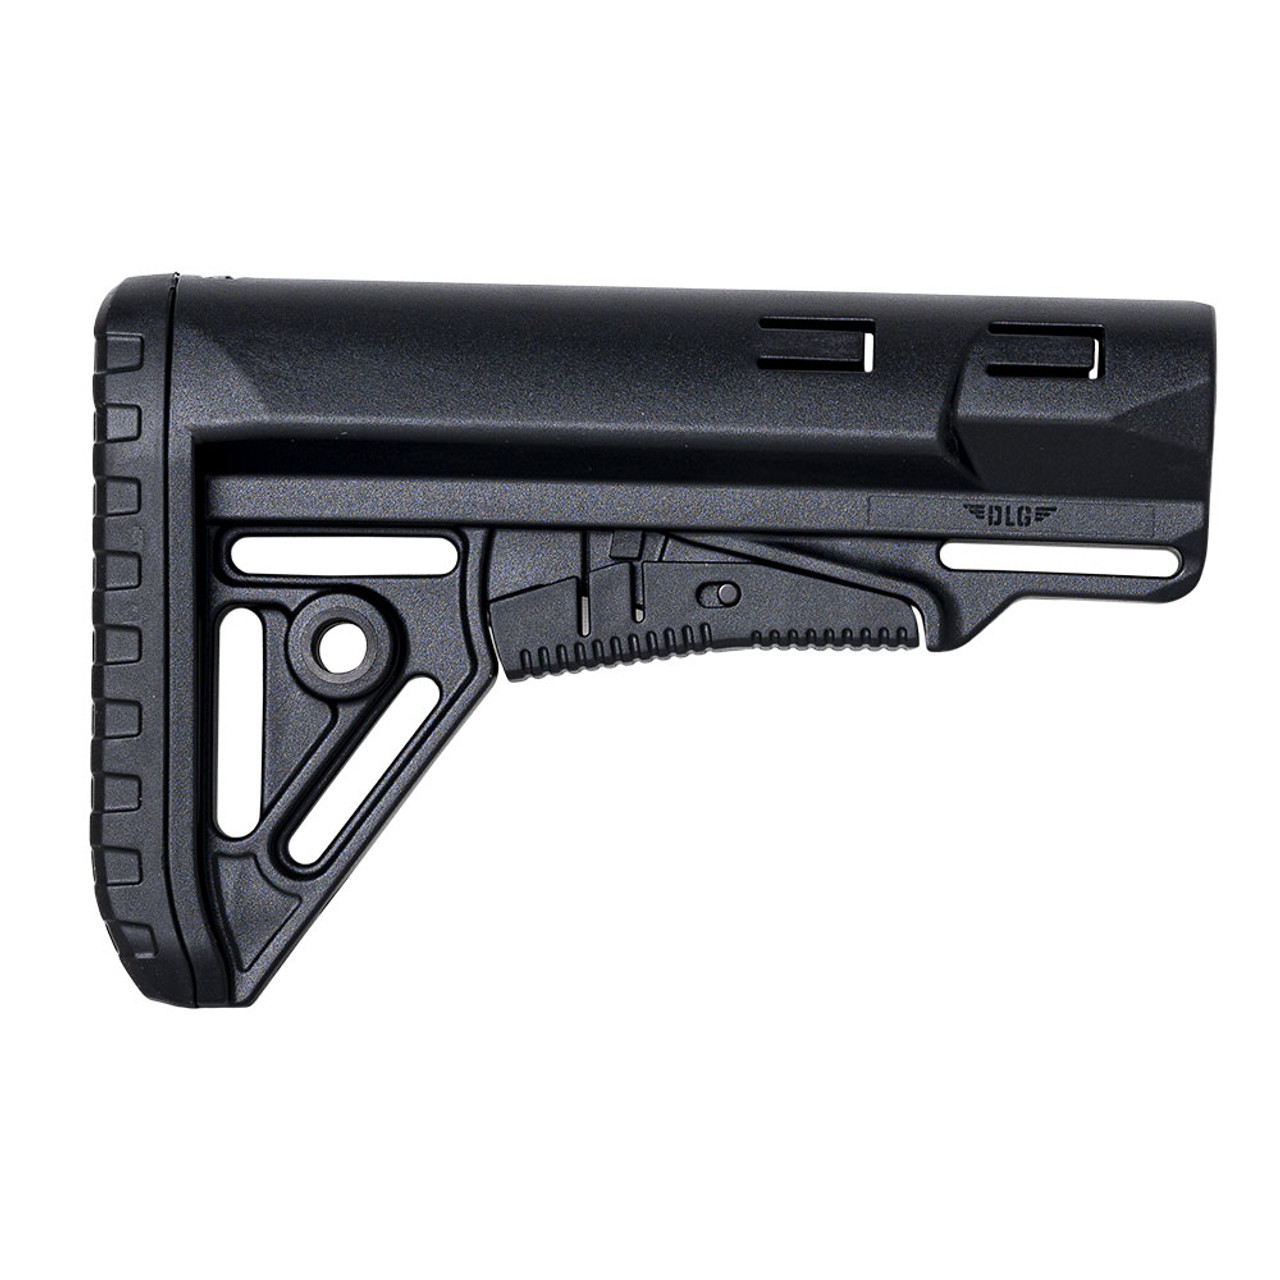 Ncstar VG129 Sharp Mil-Spec Synthetic Collapsible Butt Stock Black